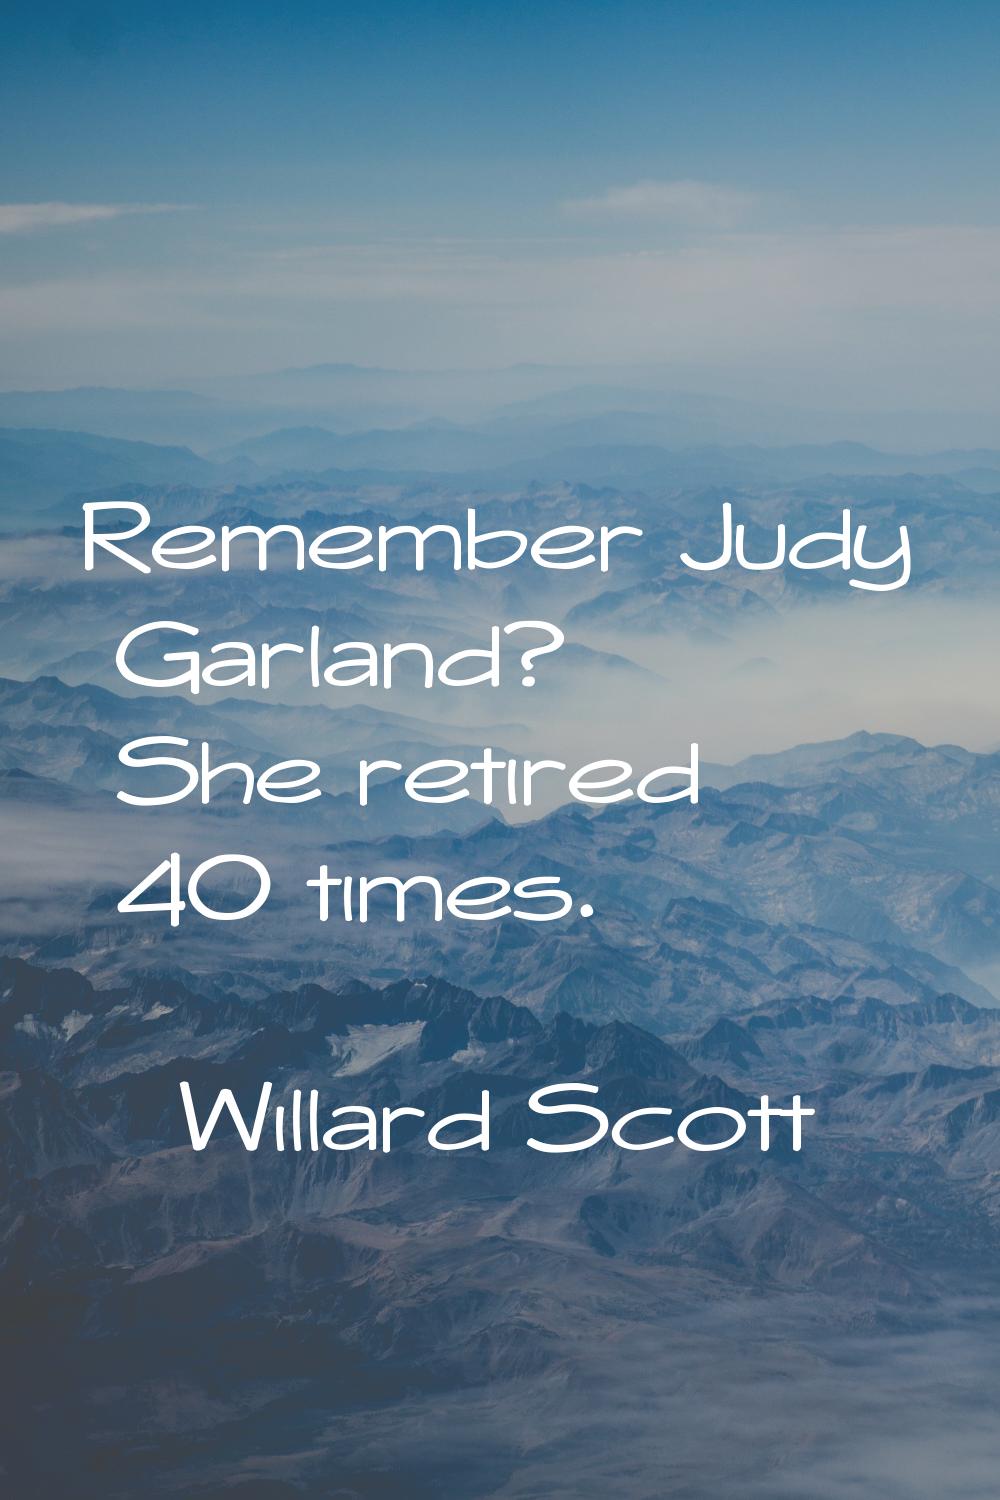 Remember Judy Garland? She retired 40 times.